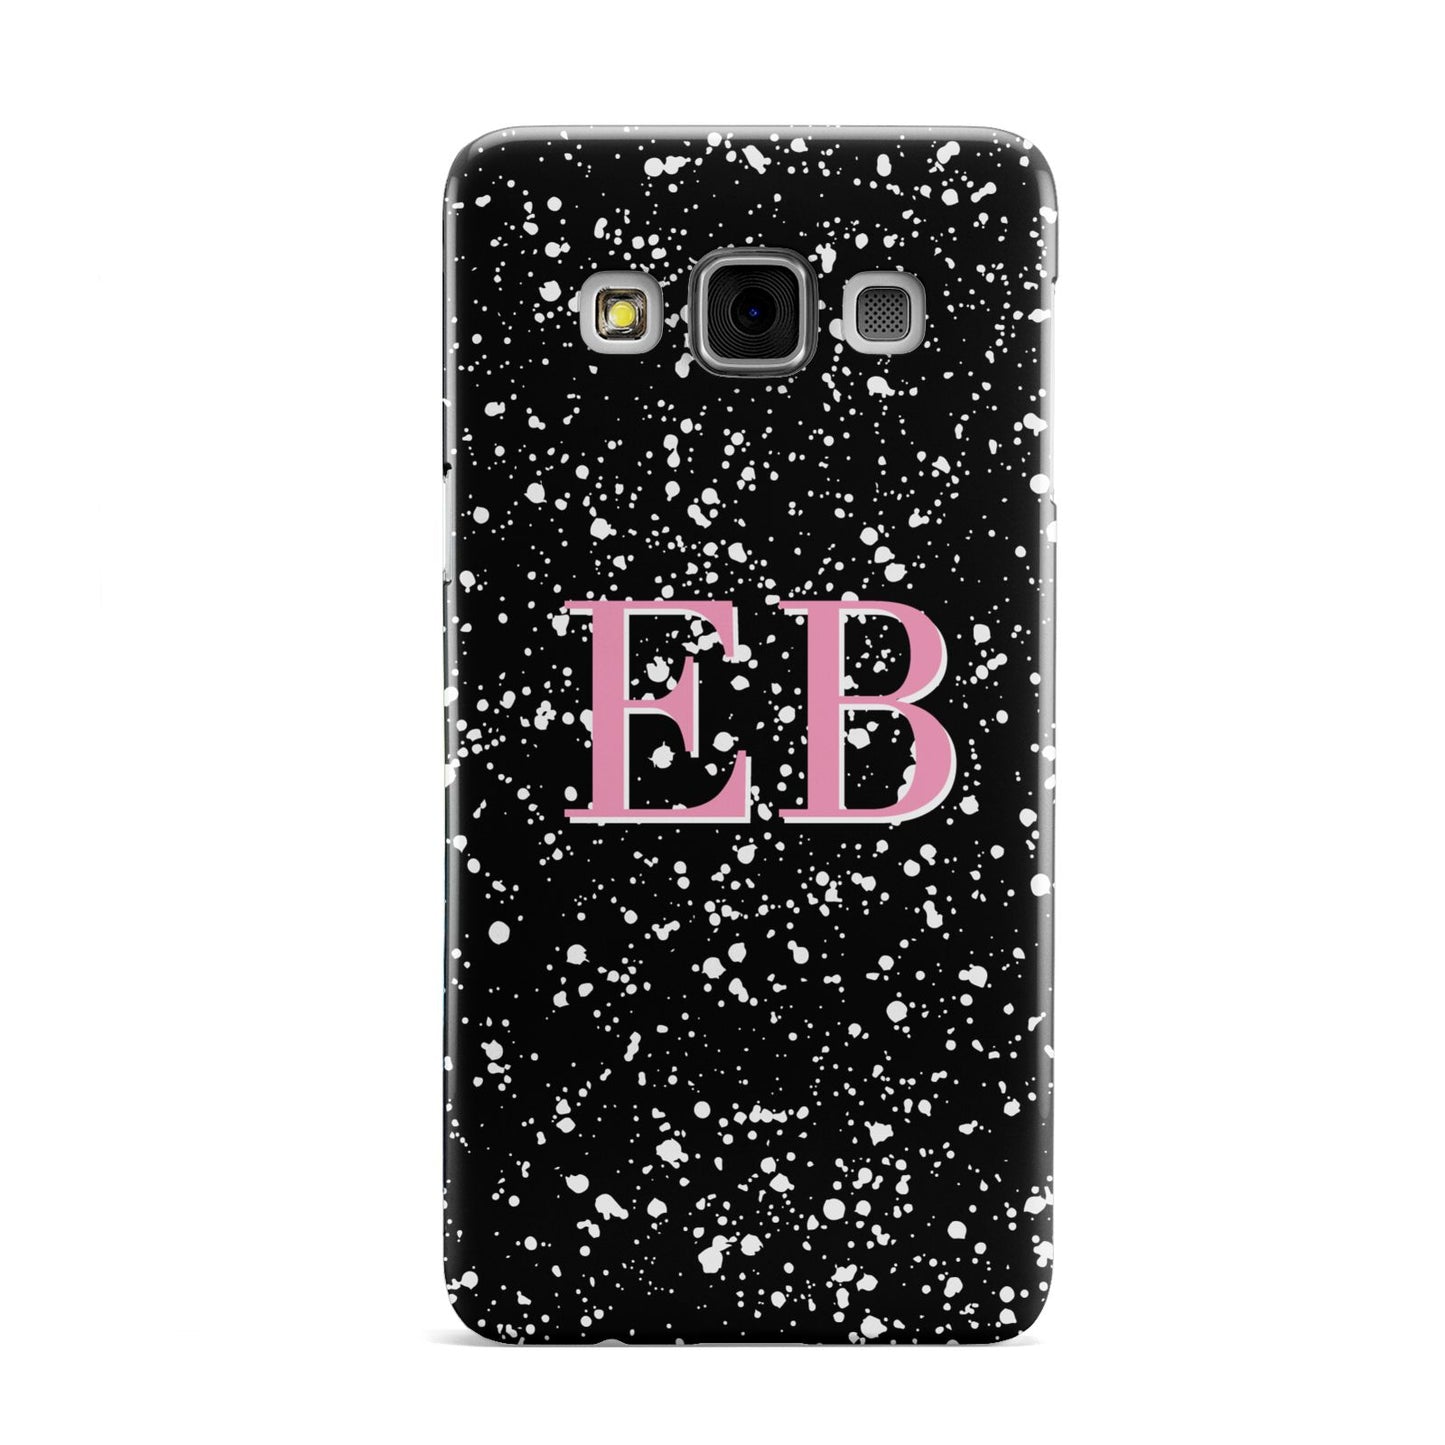 Personalised Black Ink Splat Initials Samsung Galaxy A3 Case